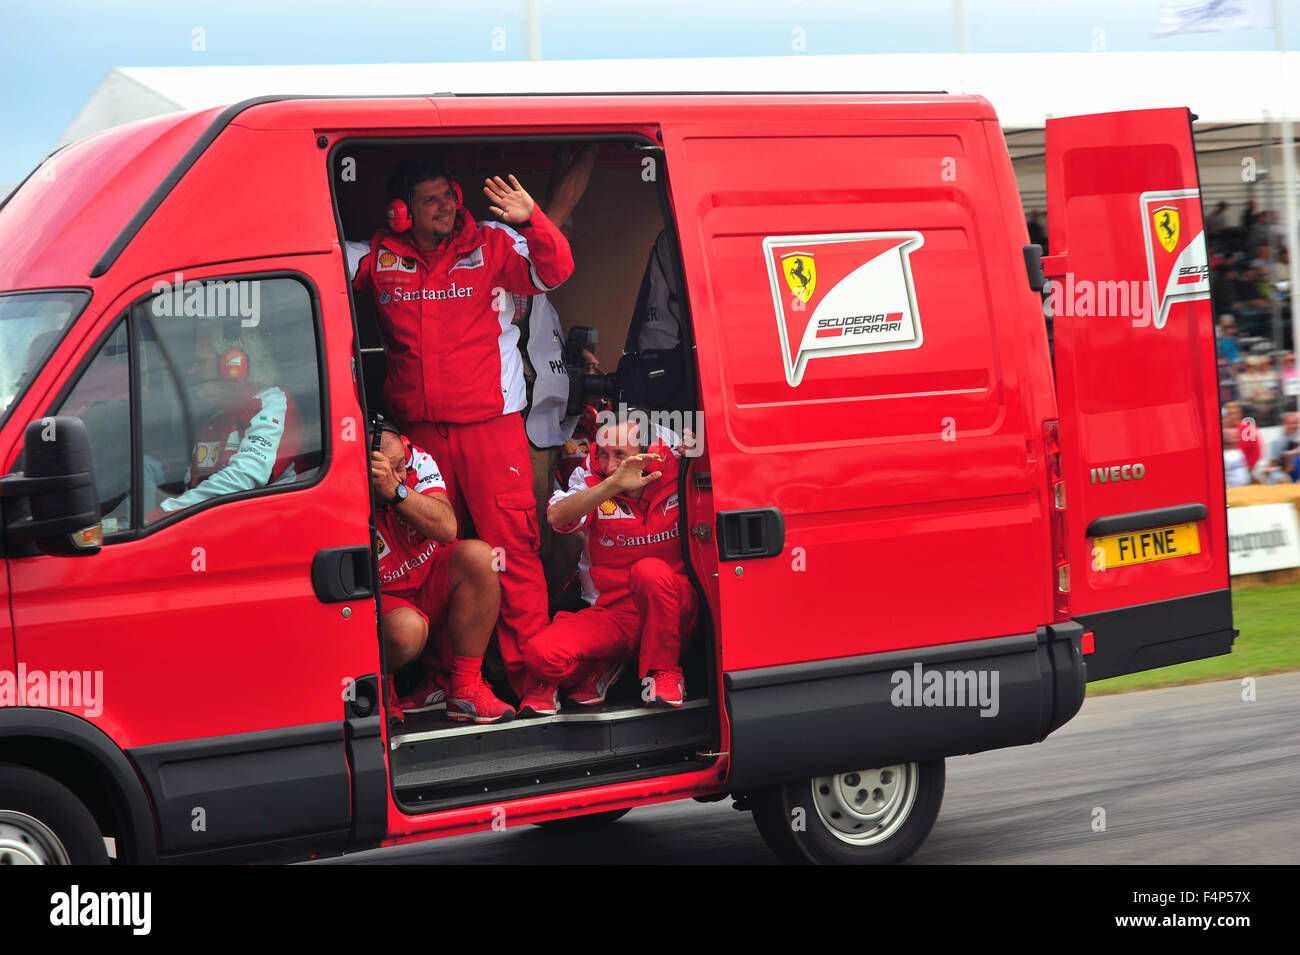 The Ferrari F1 team mechanics wave from a van at the Goodwood Festival of Speed in the UK. Stock Photo